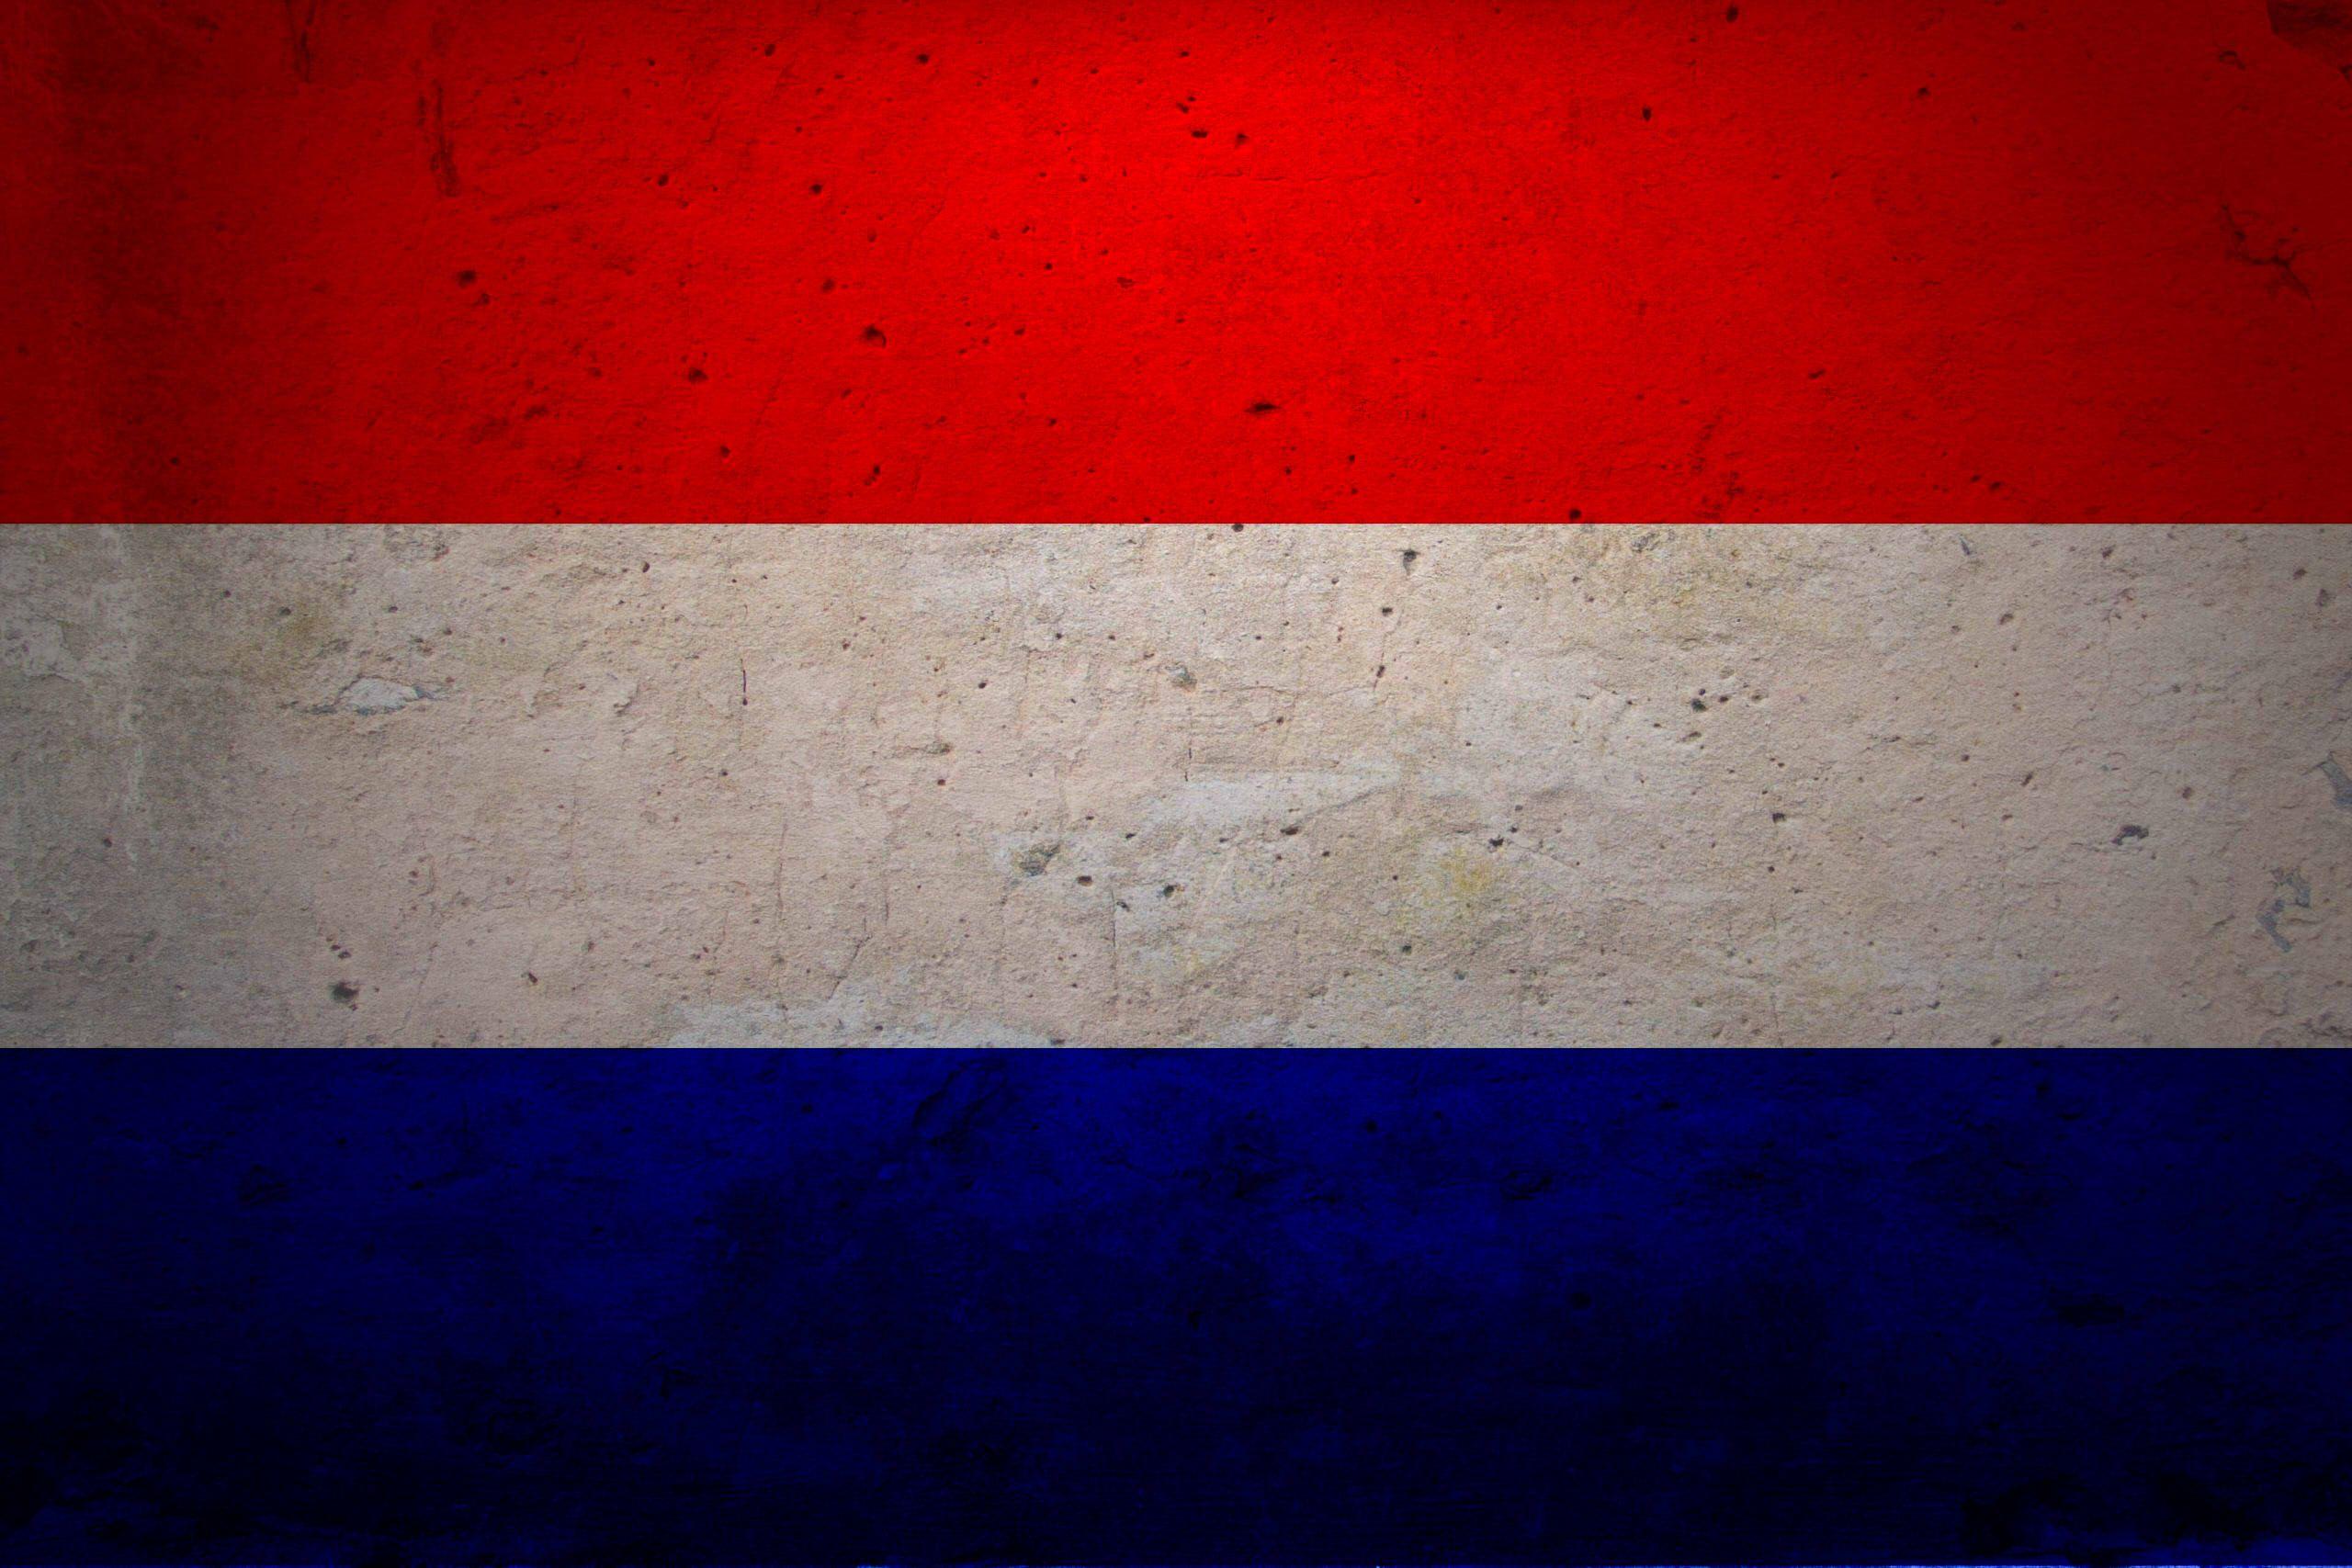 4 Flag of the Netherlands HD Wallpapers